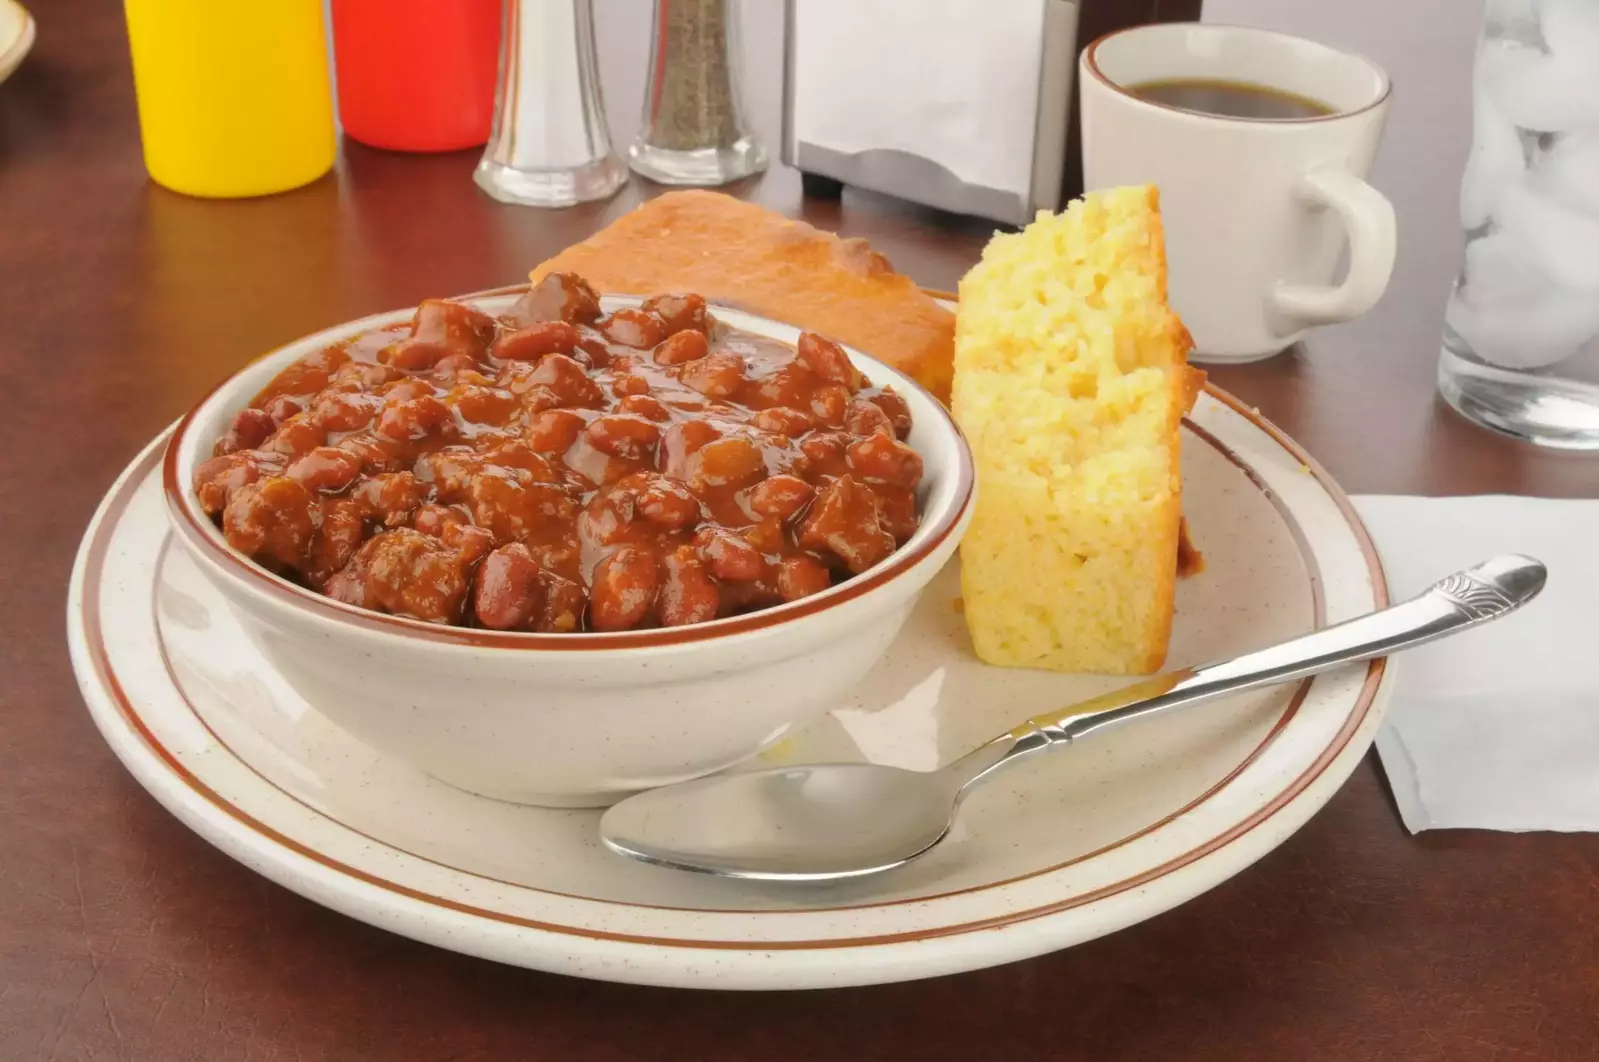 Bowl full of beans with cornbread on a plate